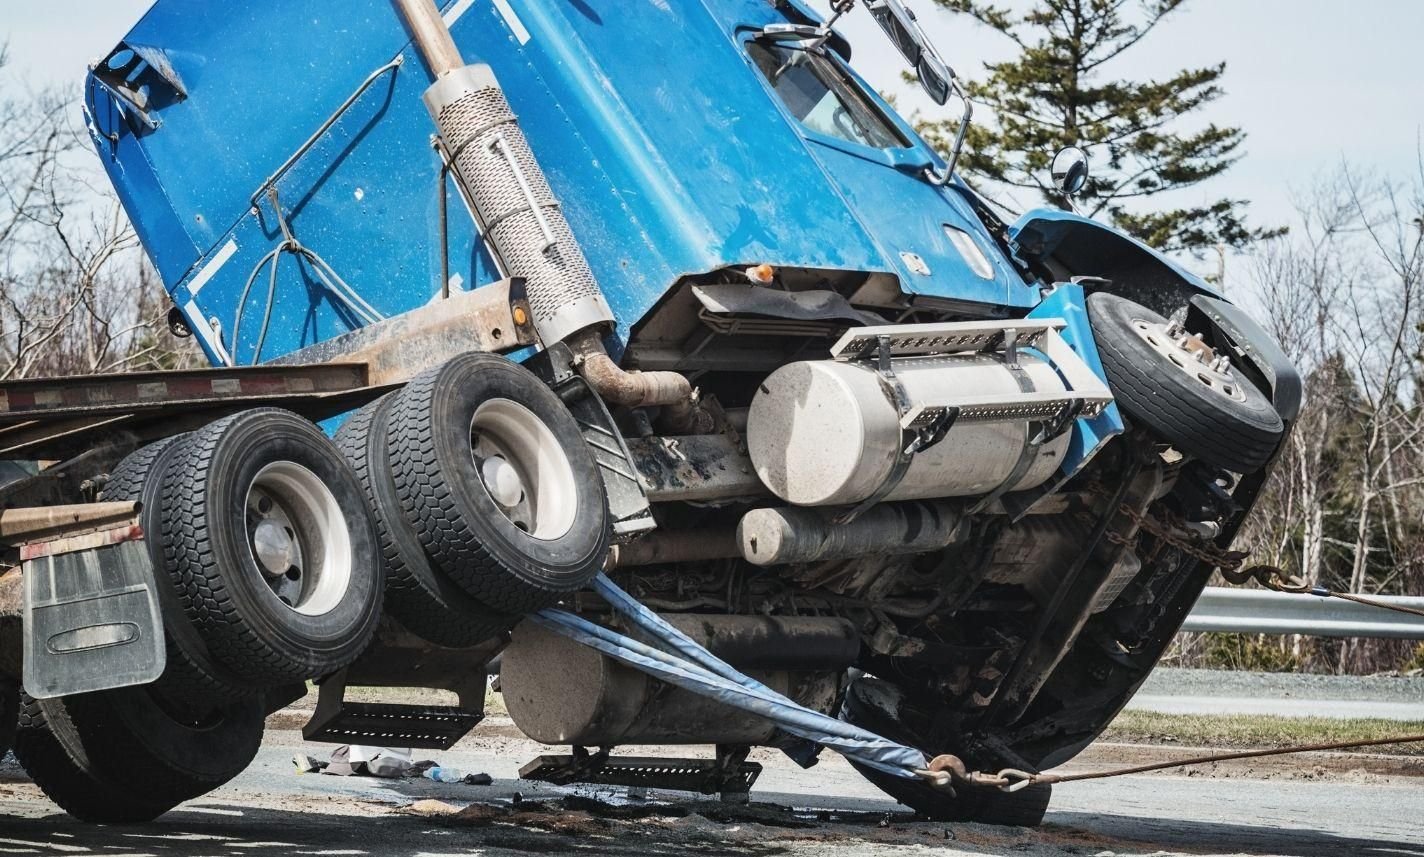 blairsville-commercial-truck-accident-injury-lawyer